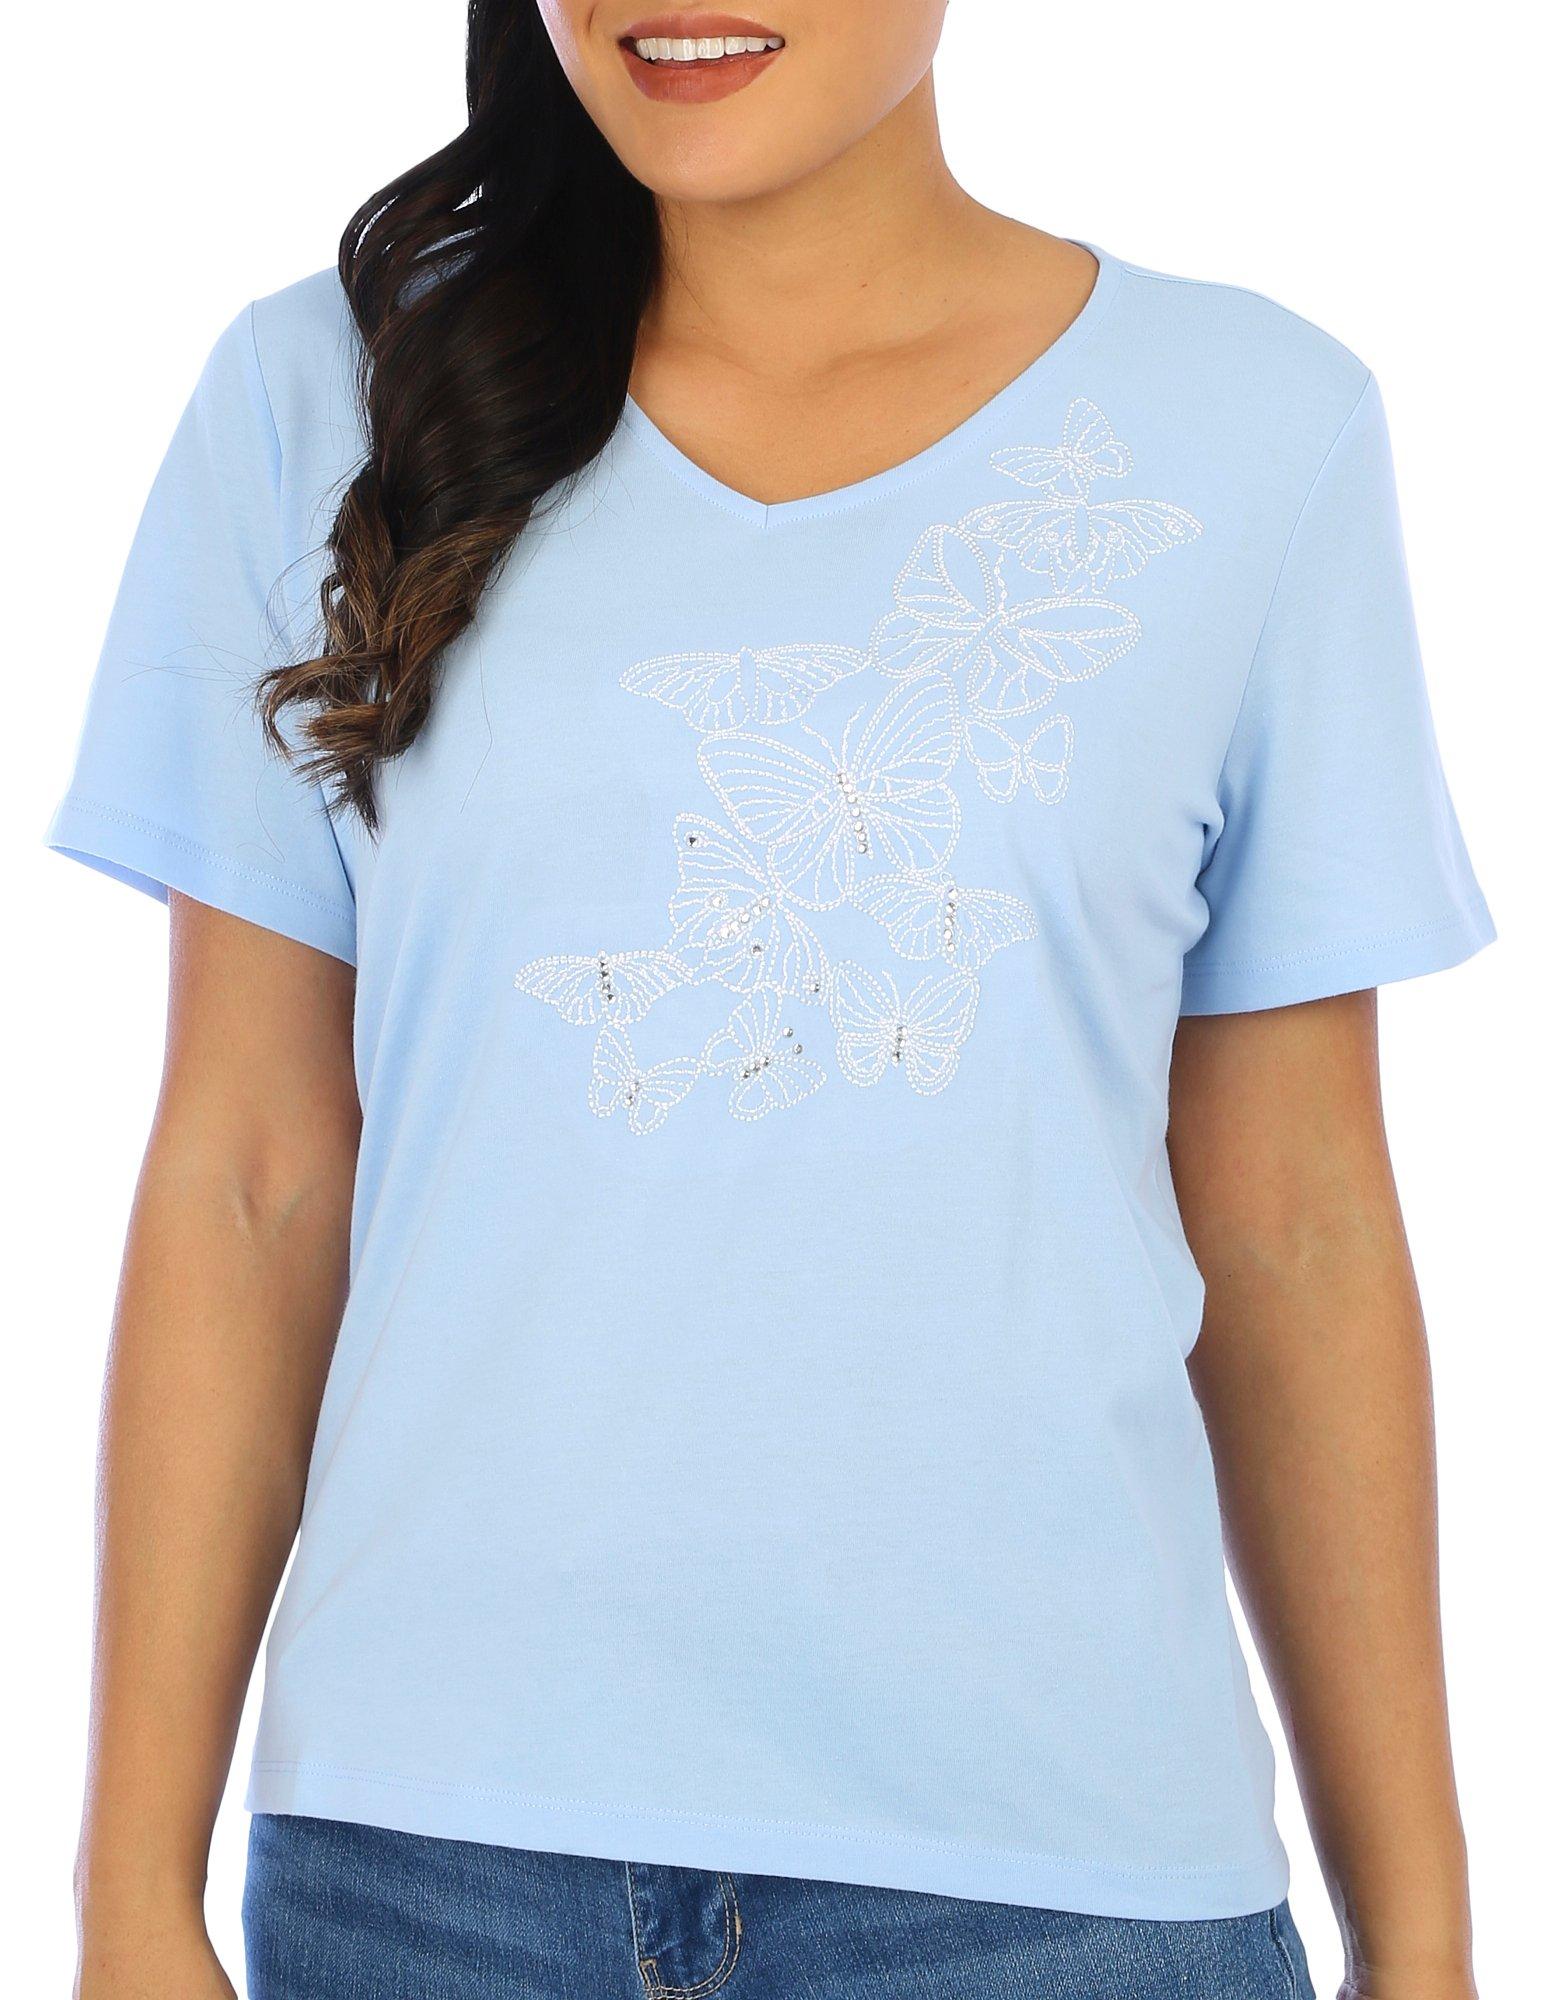 Coral Bay Petite Solid Jeweled Butterfly Short Sleeve Top